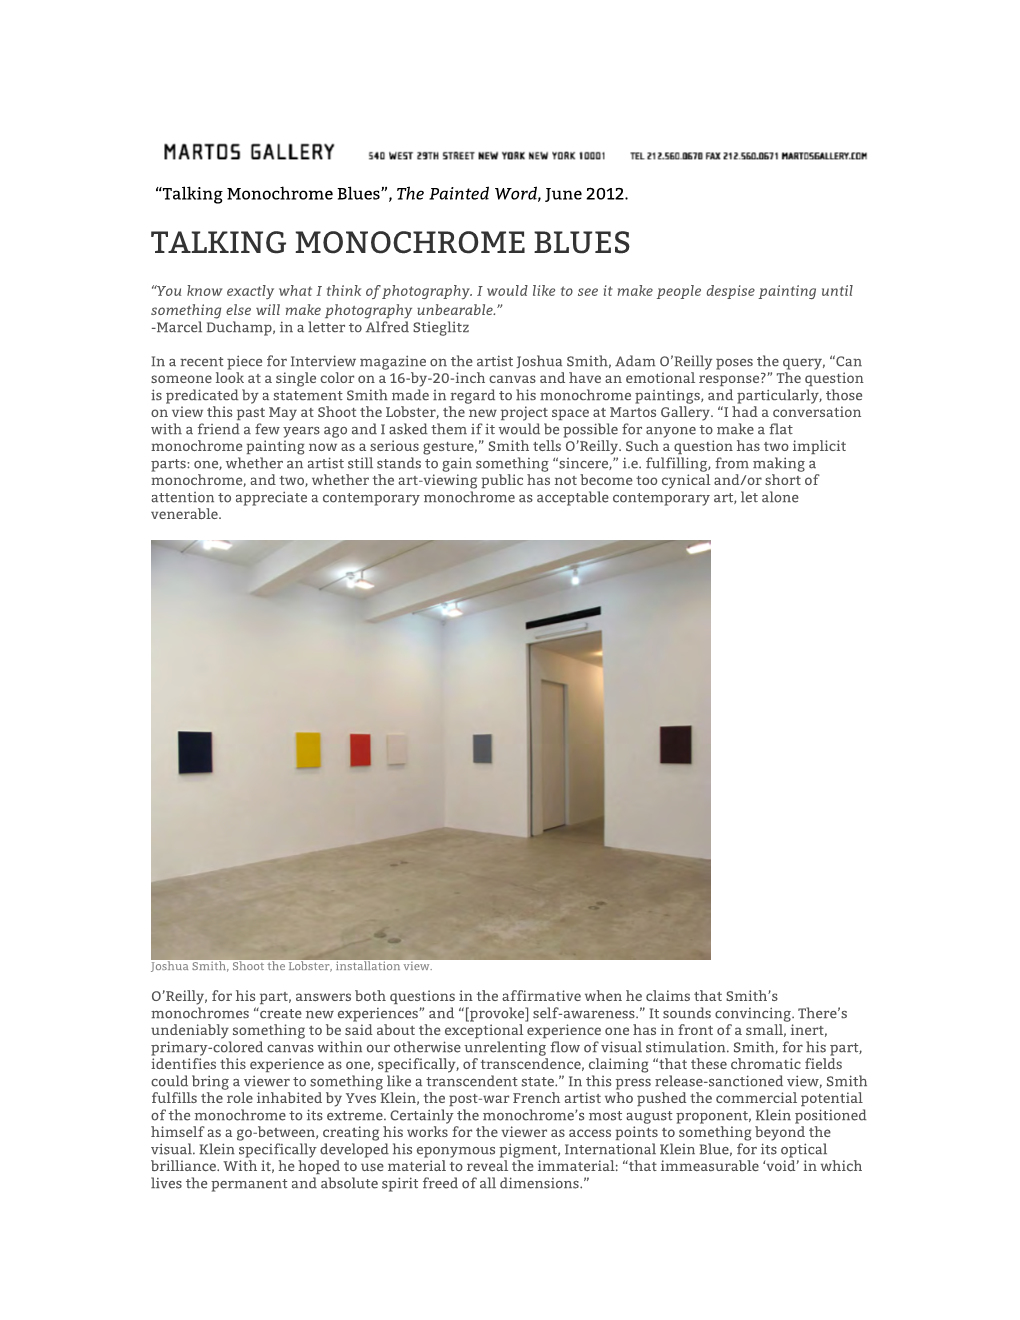 Talking Monochrome Blues”, the Painted Word, June 2012